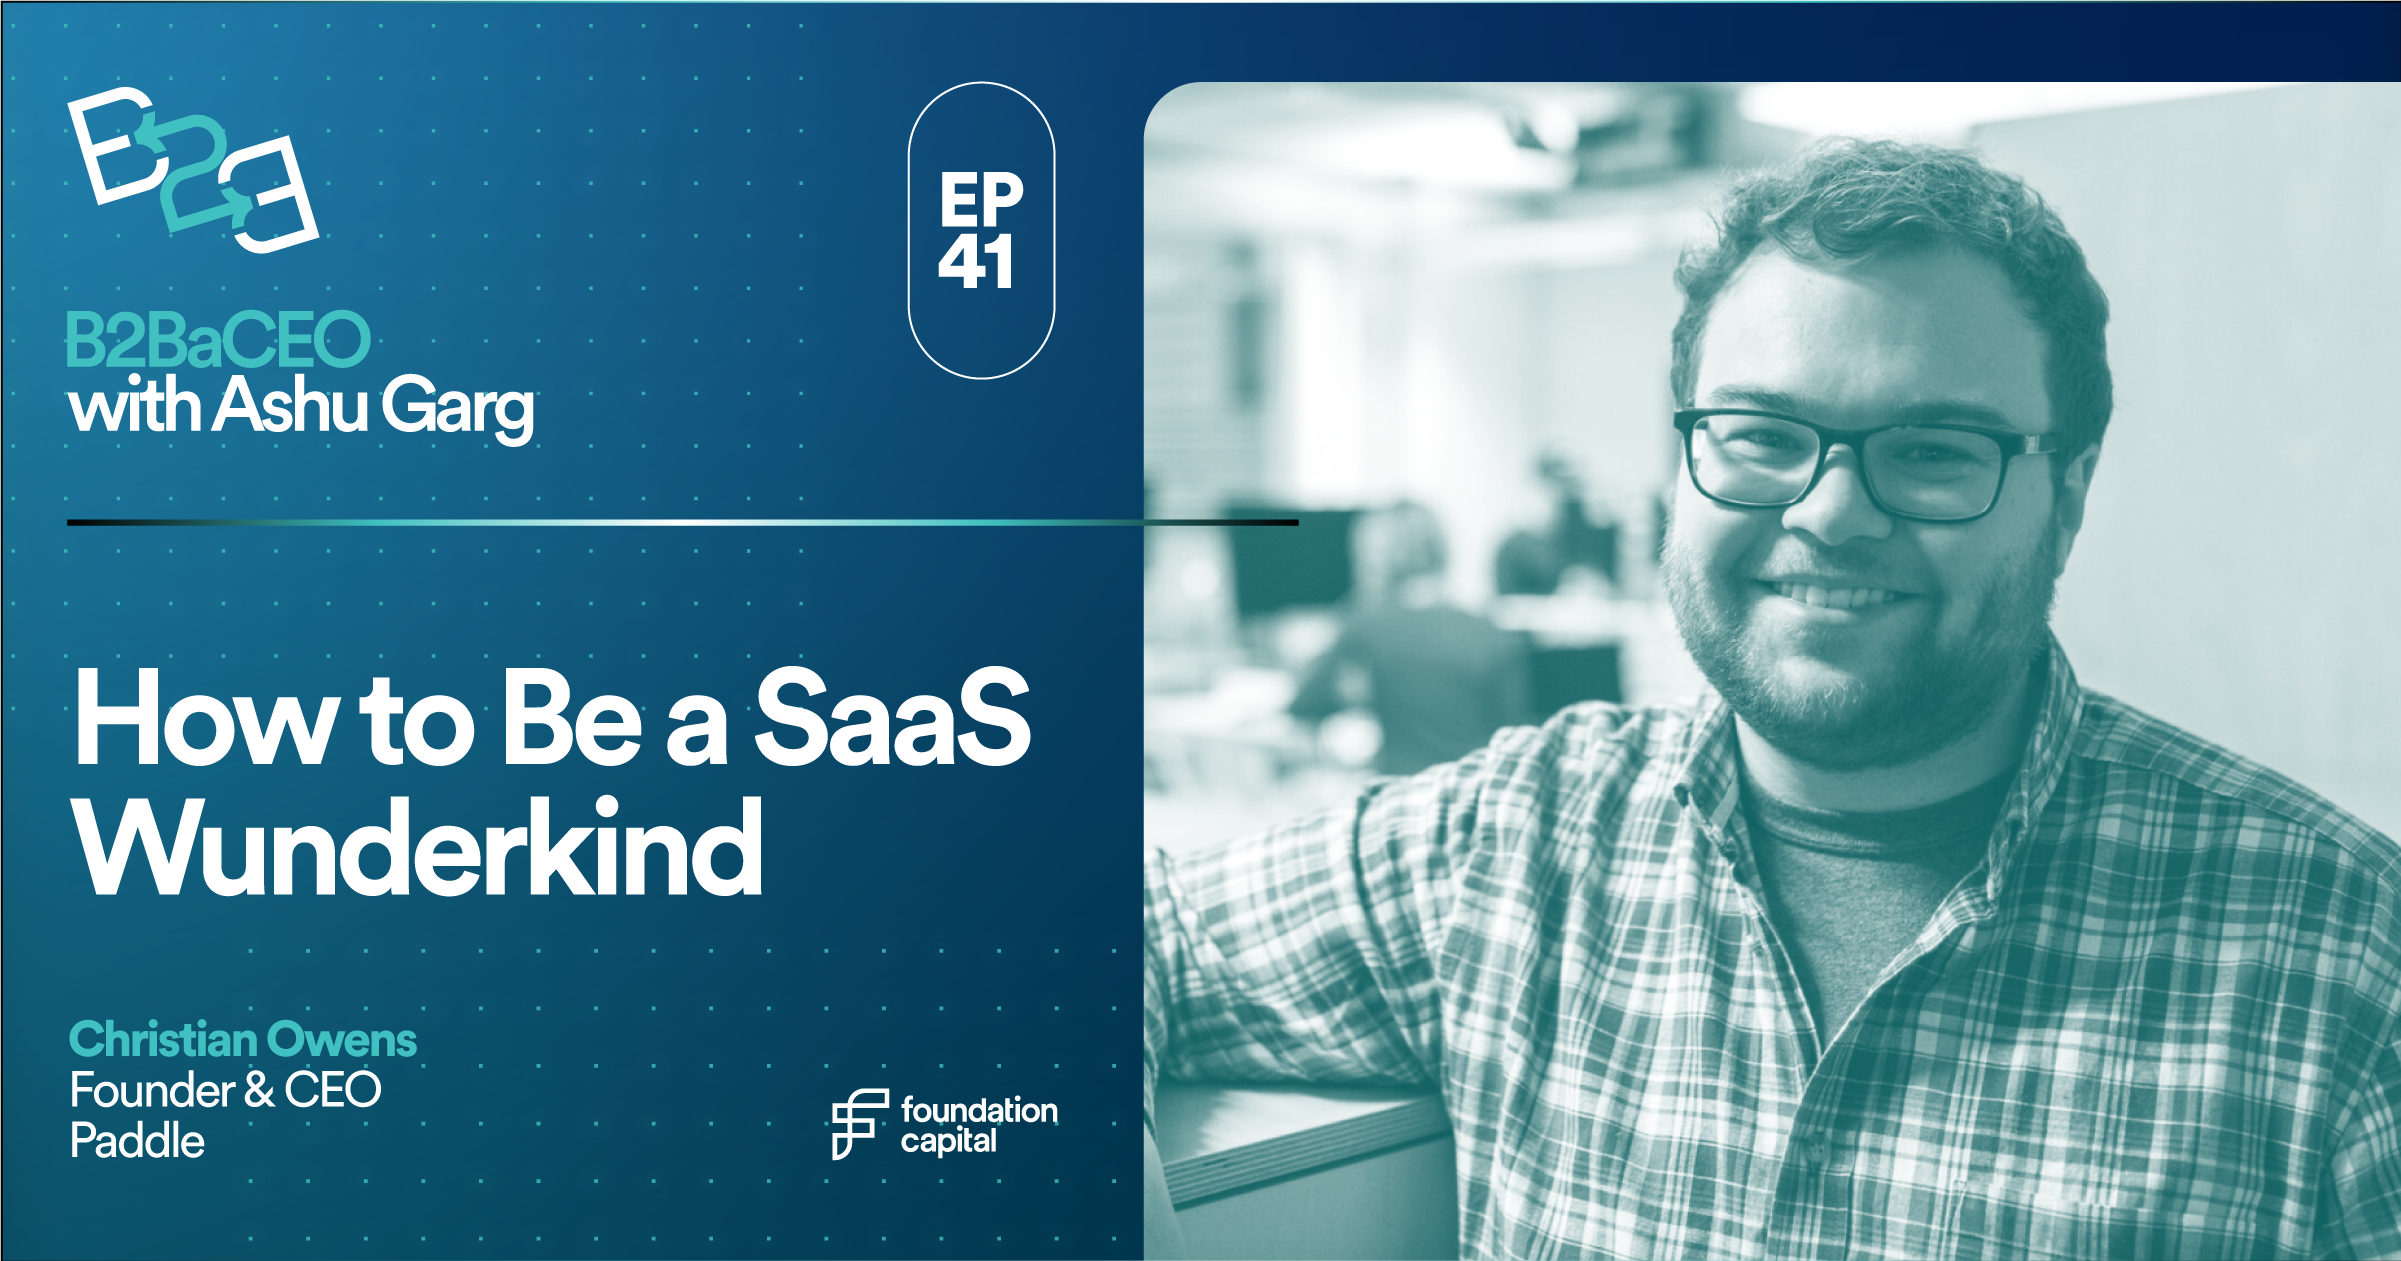 Christian Owens, How to be a SaaS wunderkind, Founder and CEO at Paddle